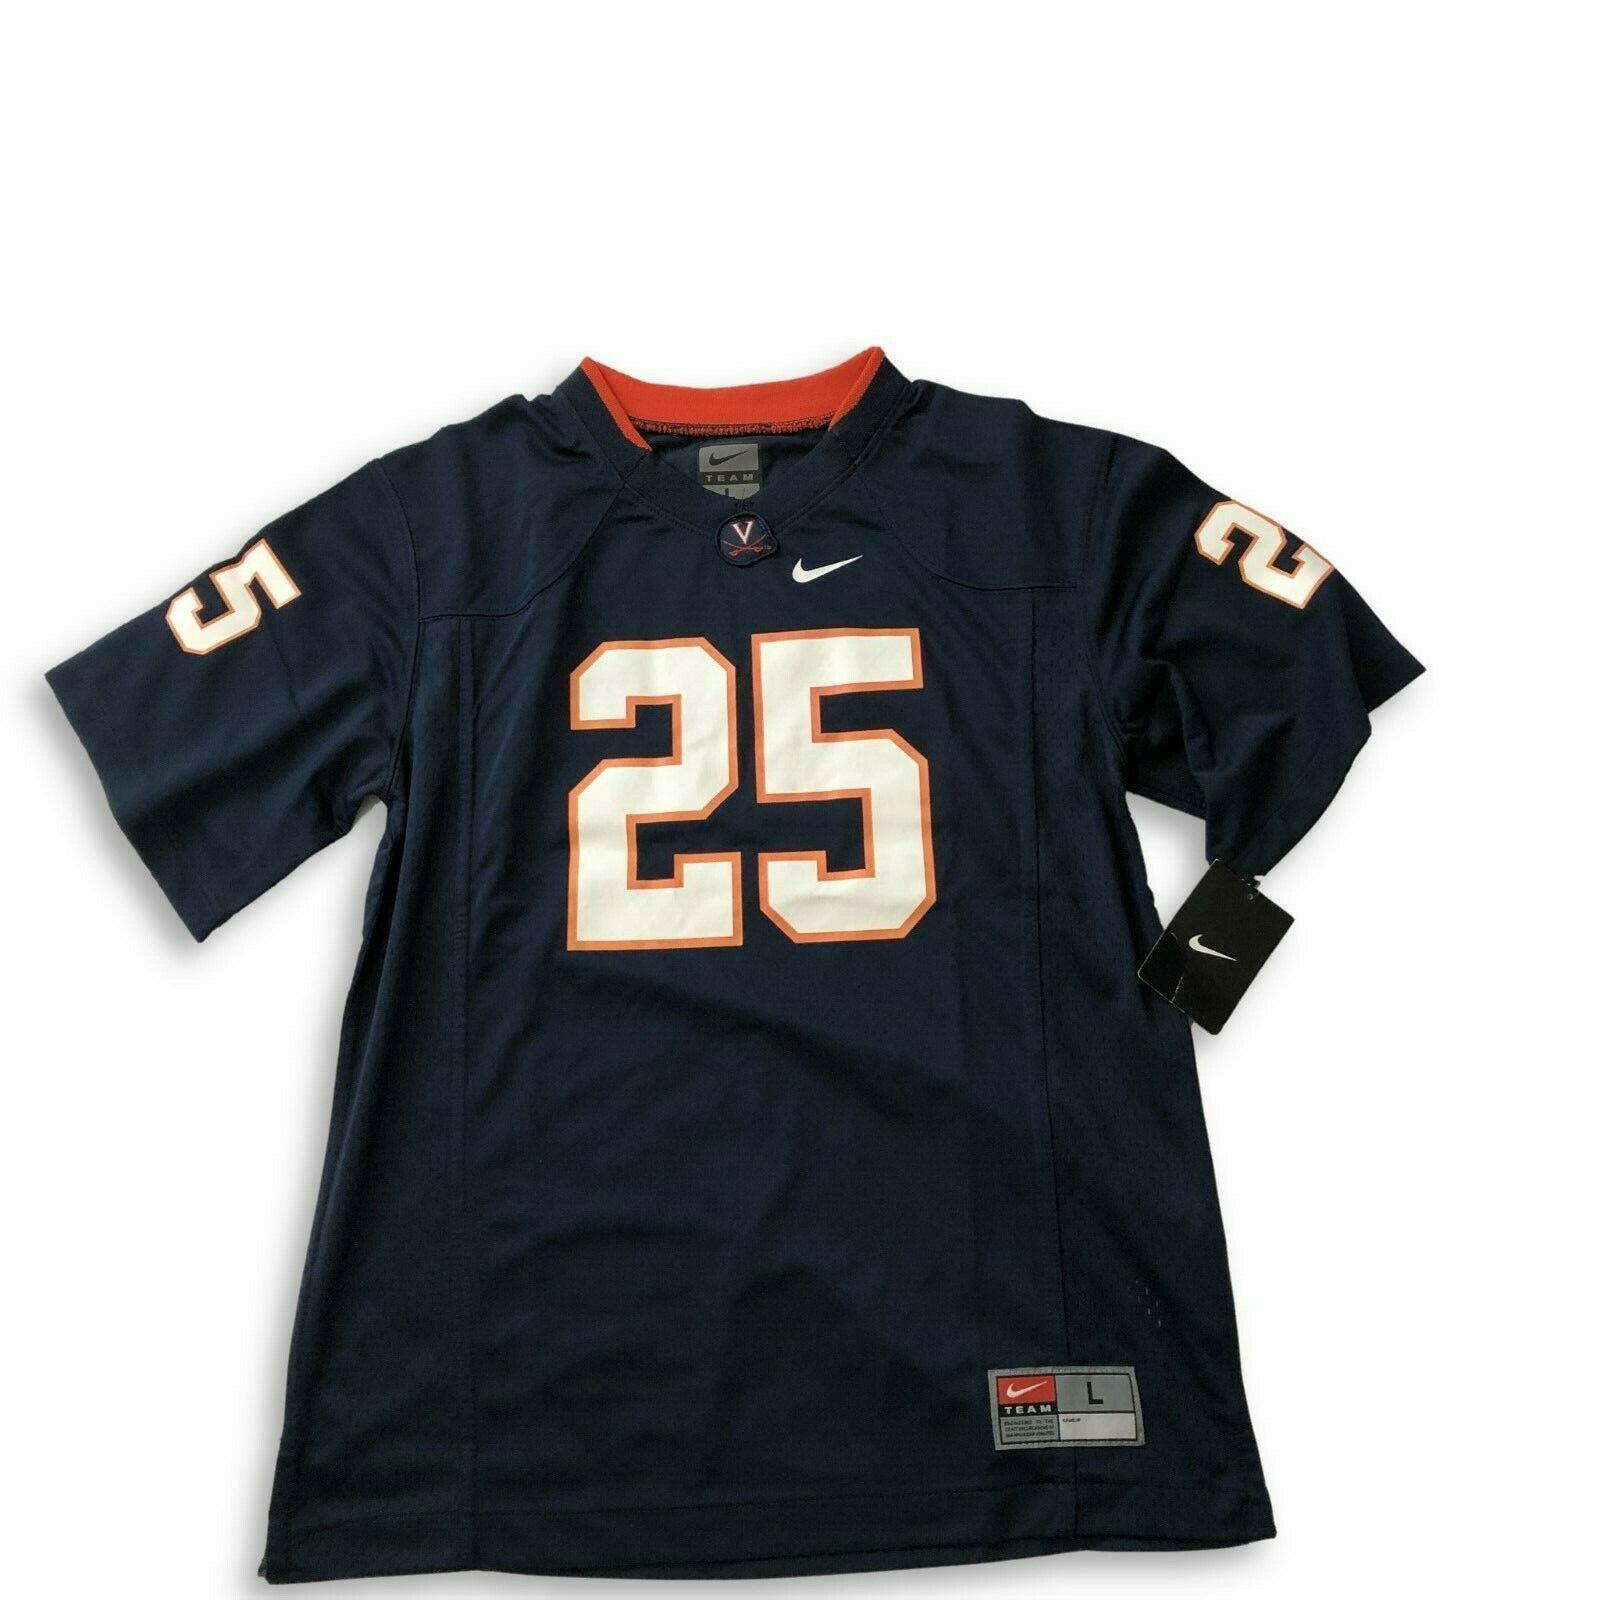 NWT New #25 Virginia Cavaliers Nike Youth Boy's Large Football Jersey - $37.57